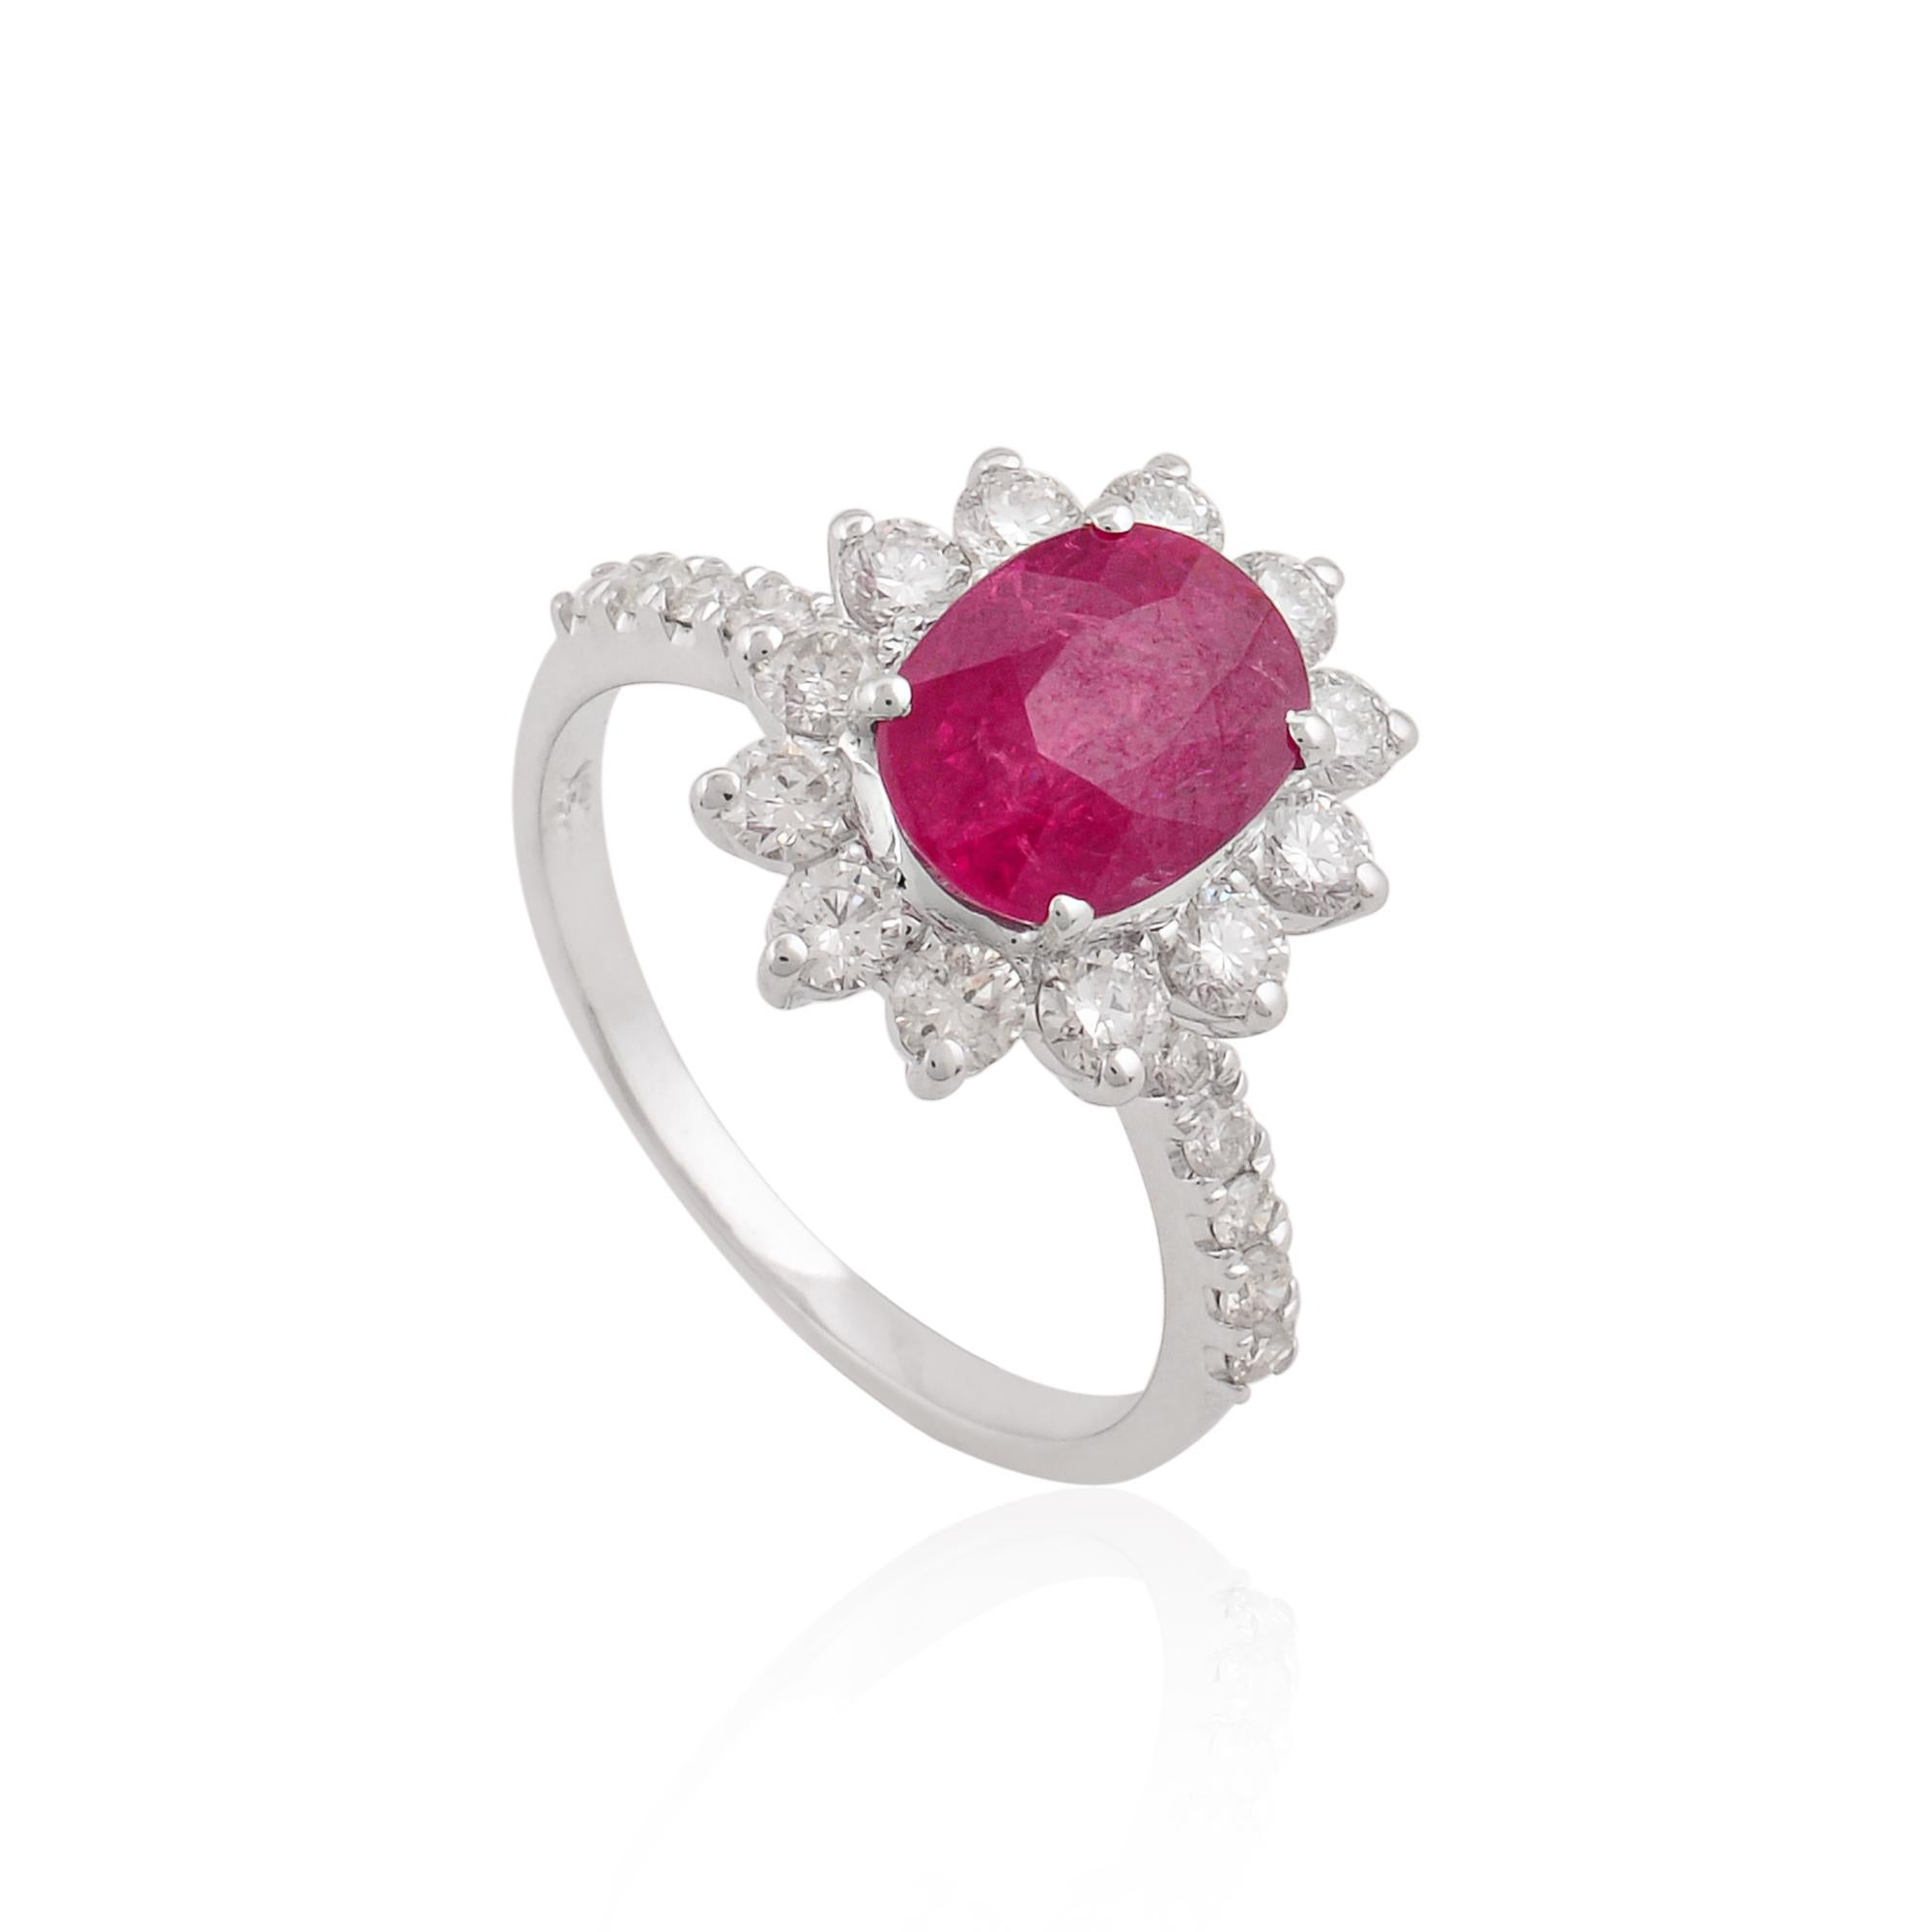 For Sale:  Ruby Gemstone Cocktail Ring SI Clarity HI Color Pave Diamond 18 Karat White Gold 4